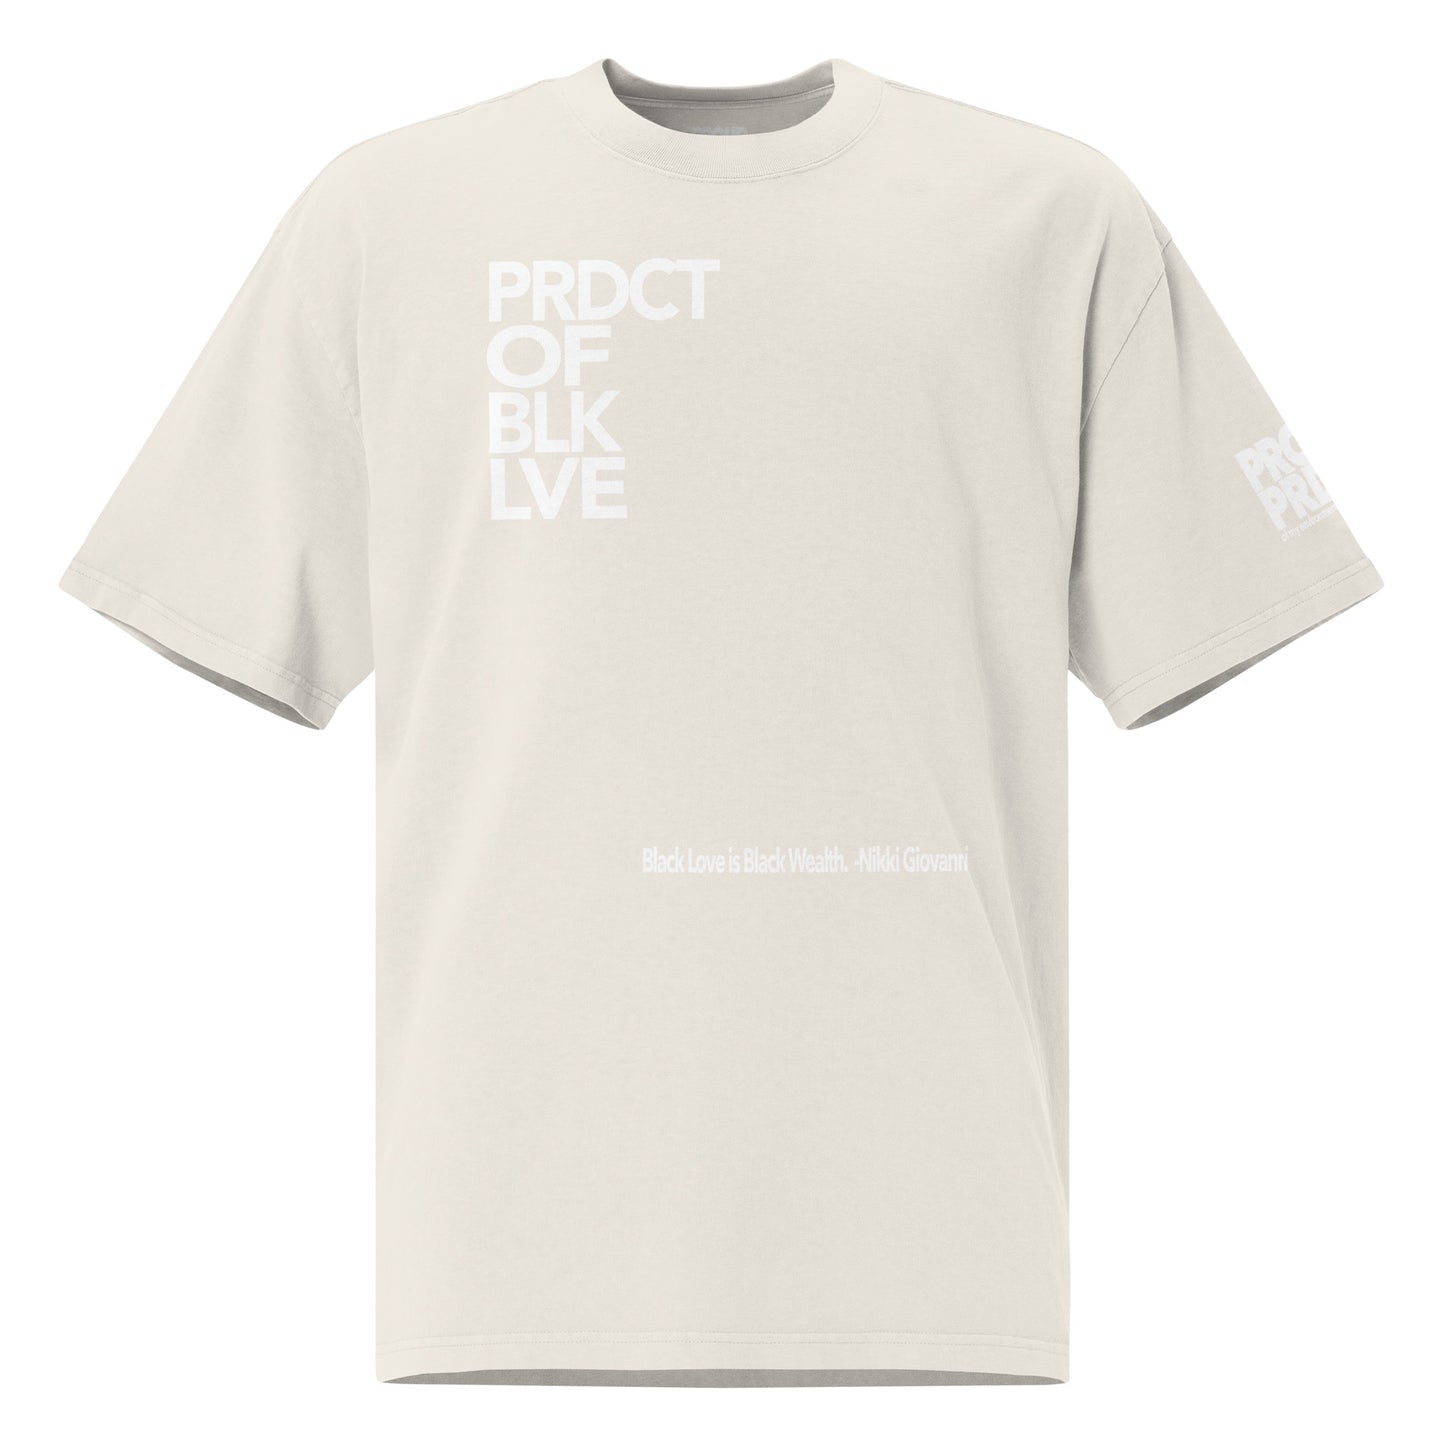 "Product of Black Love" Oversized t-shirt